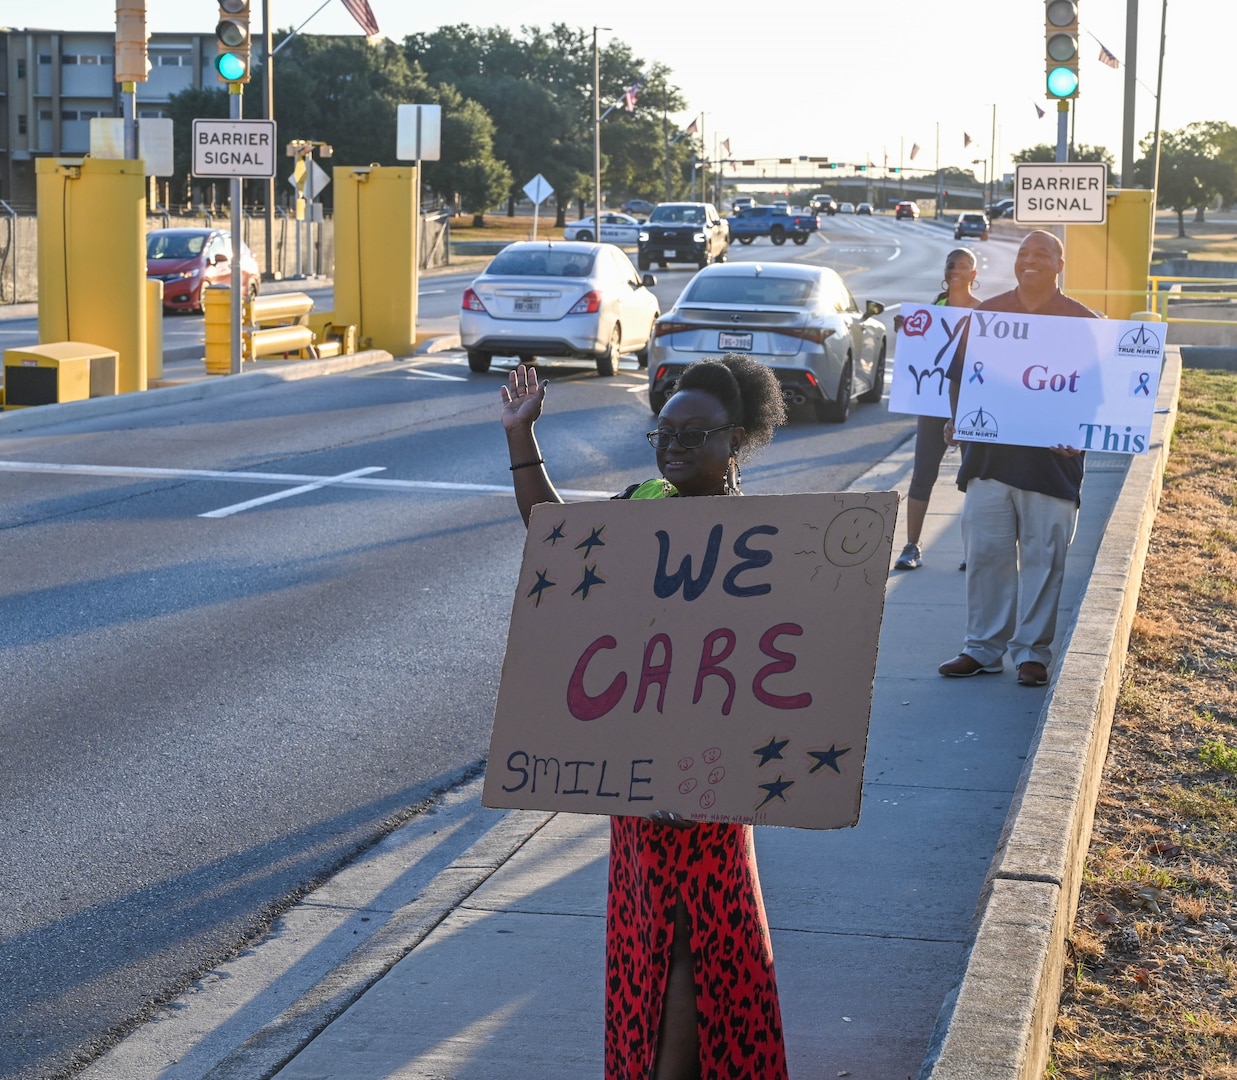 ‘We Care’ messages show support throughout JBSA community